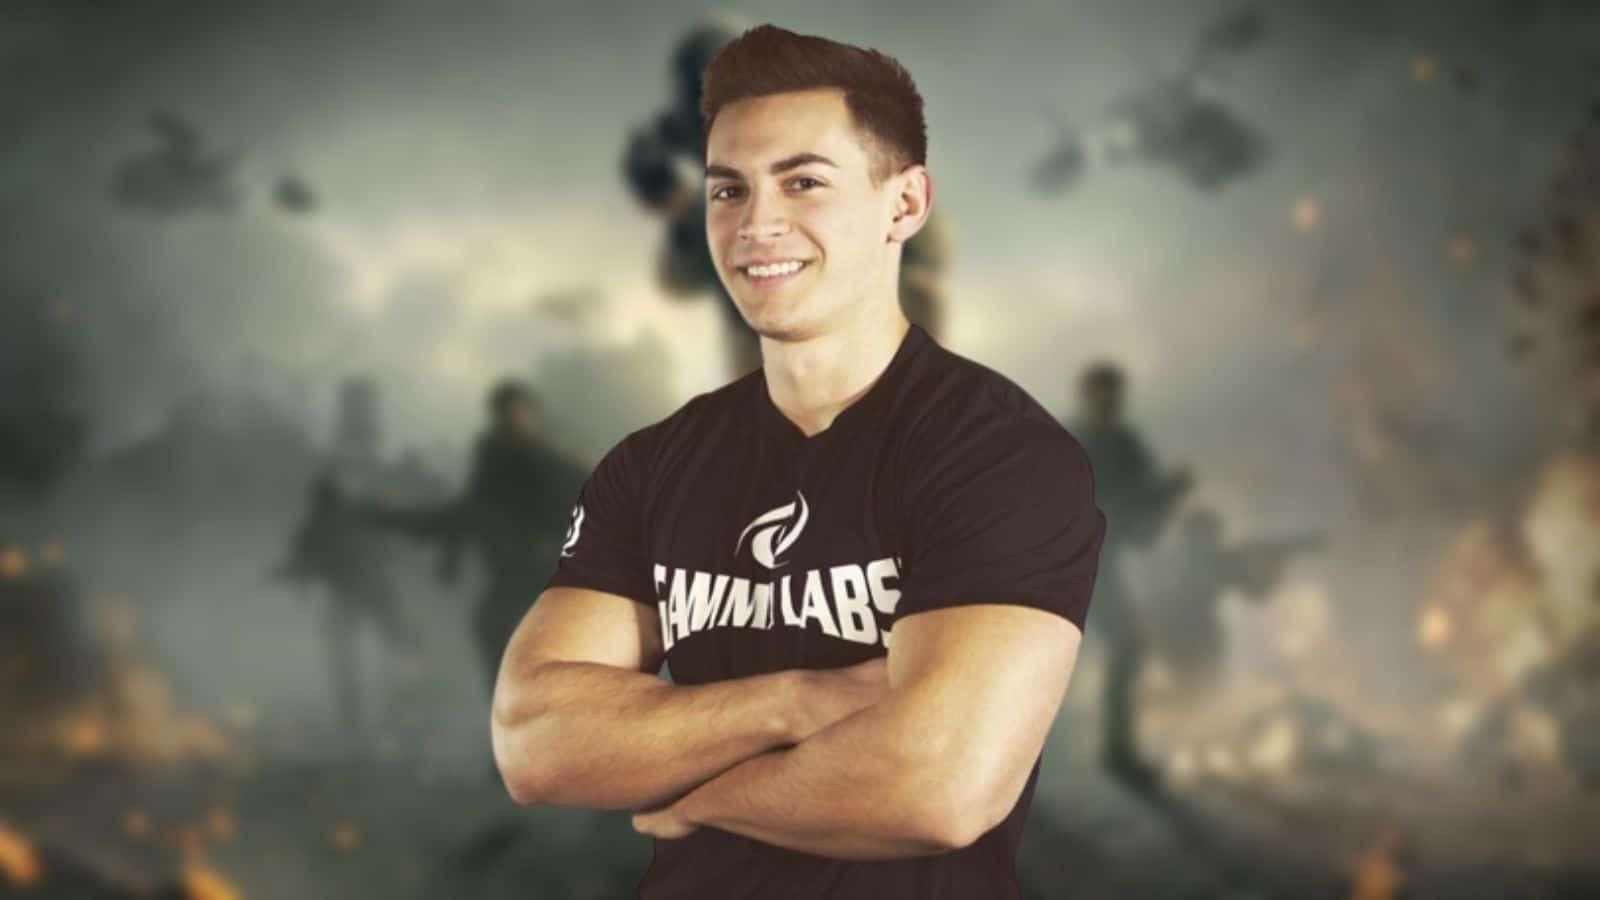 Censor in front of a Call of Dury background